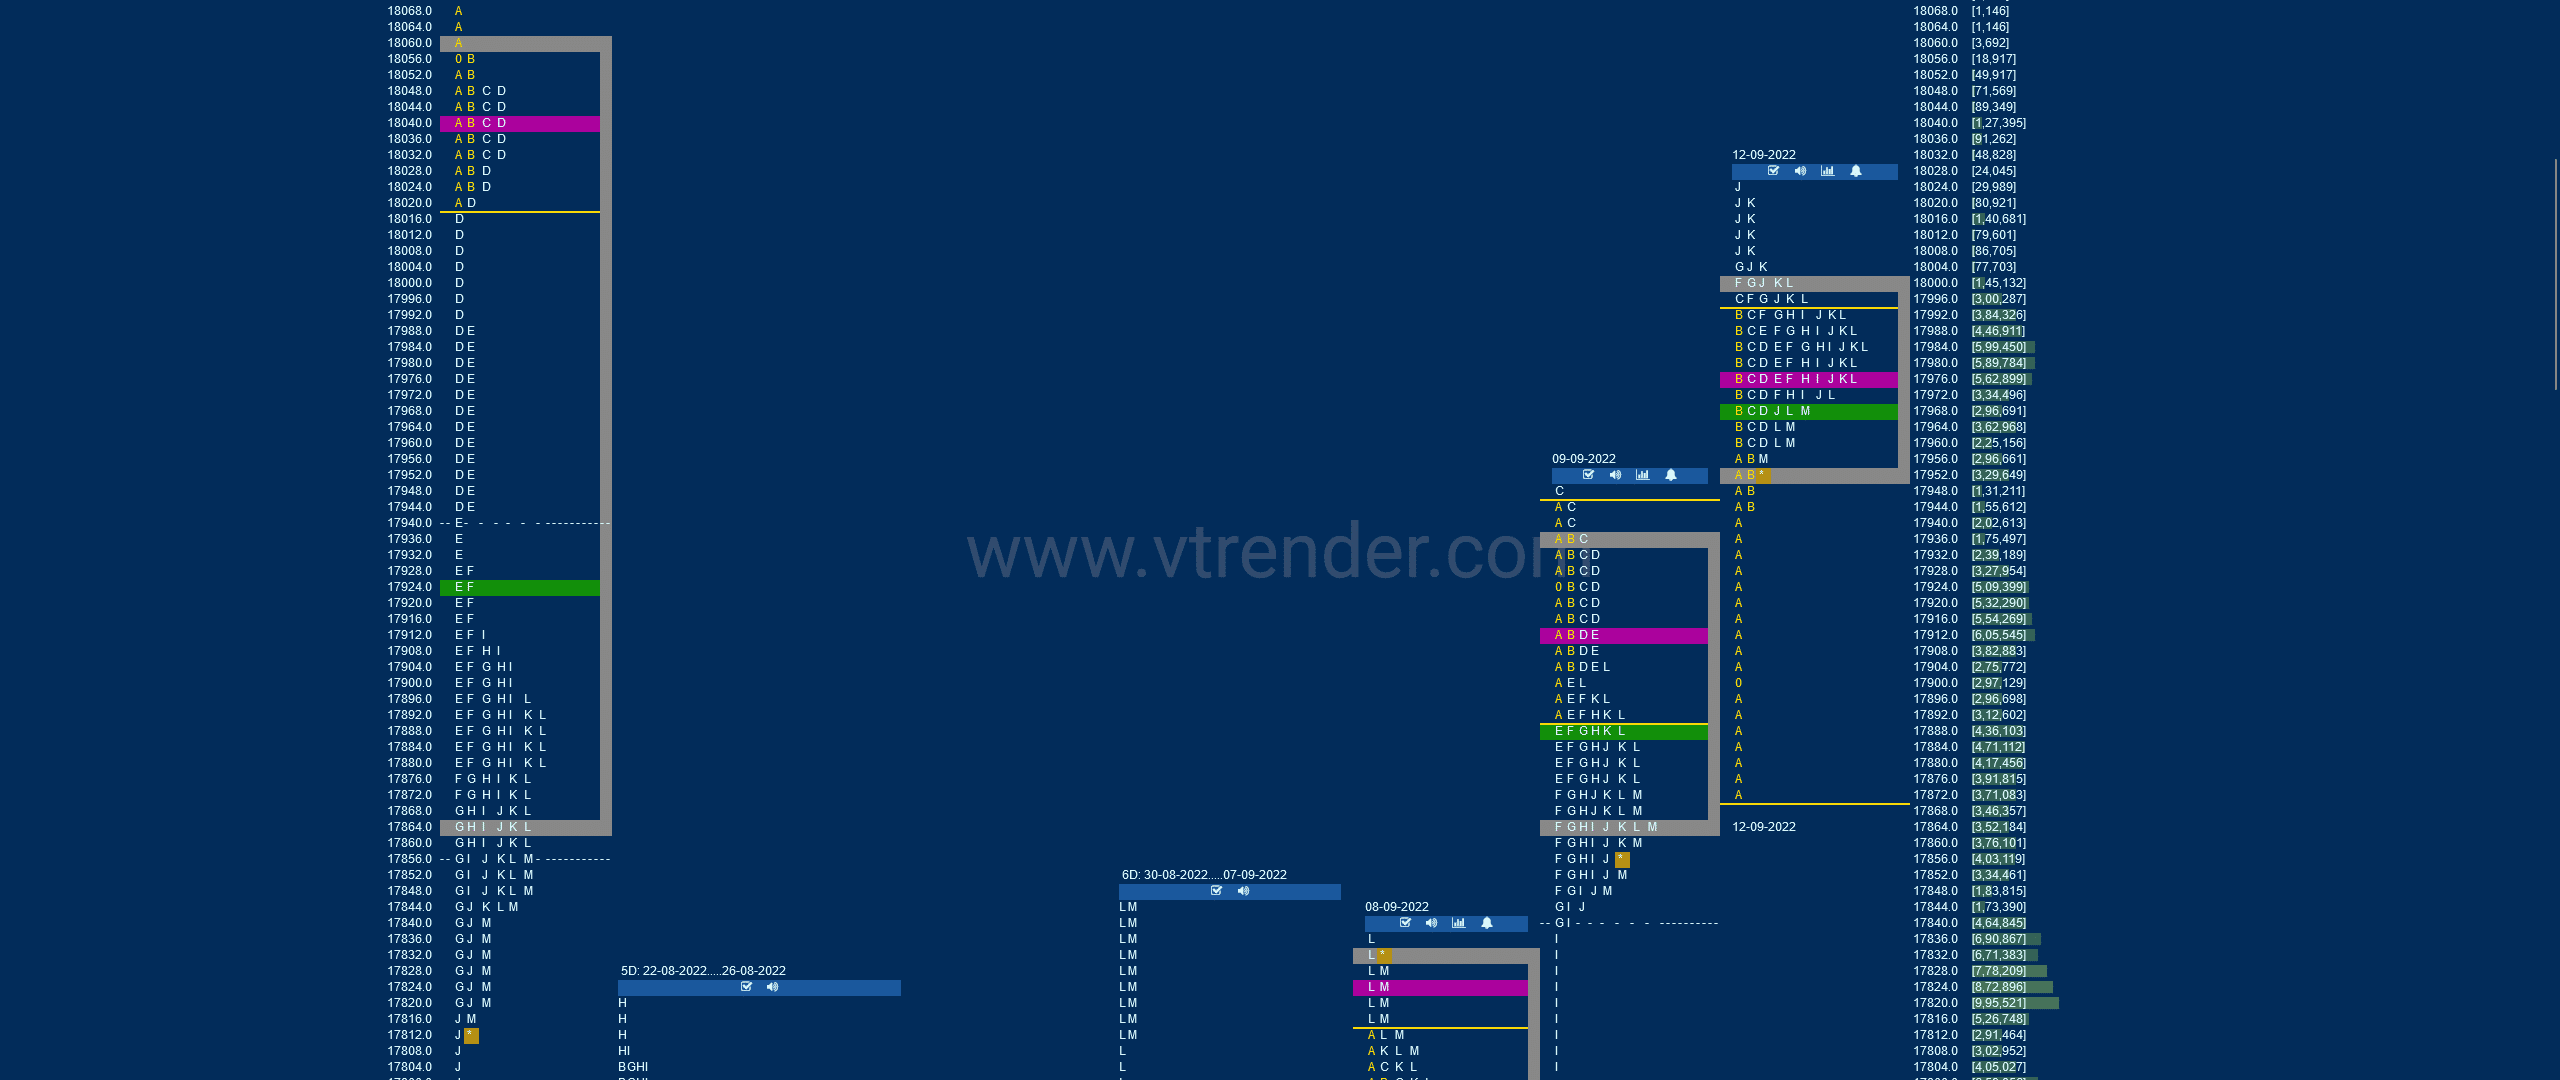 Nf 7 Market Profile Analysis Dated 12Th Sep 2022 Banknifty Futures, Charts, Day Trading, Intraday Trading, Intraday Trading Strategies, Market Profile, Market Profile Trading Strategies, Nifty Futures, Order Flow Analysis, Support And Resistance, Technical Analysis, Trading Strategies, Volume Profile Trading